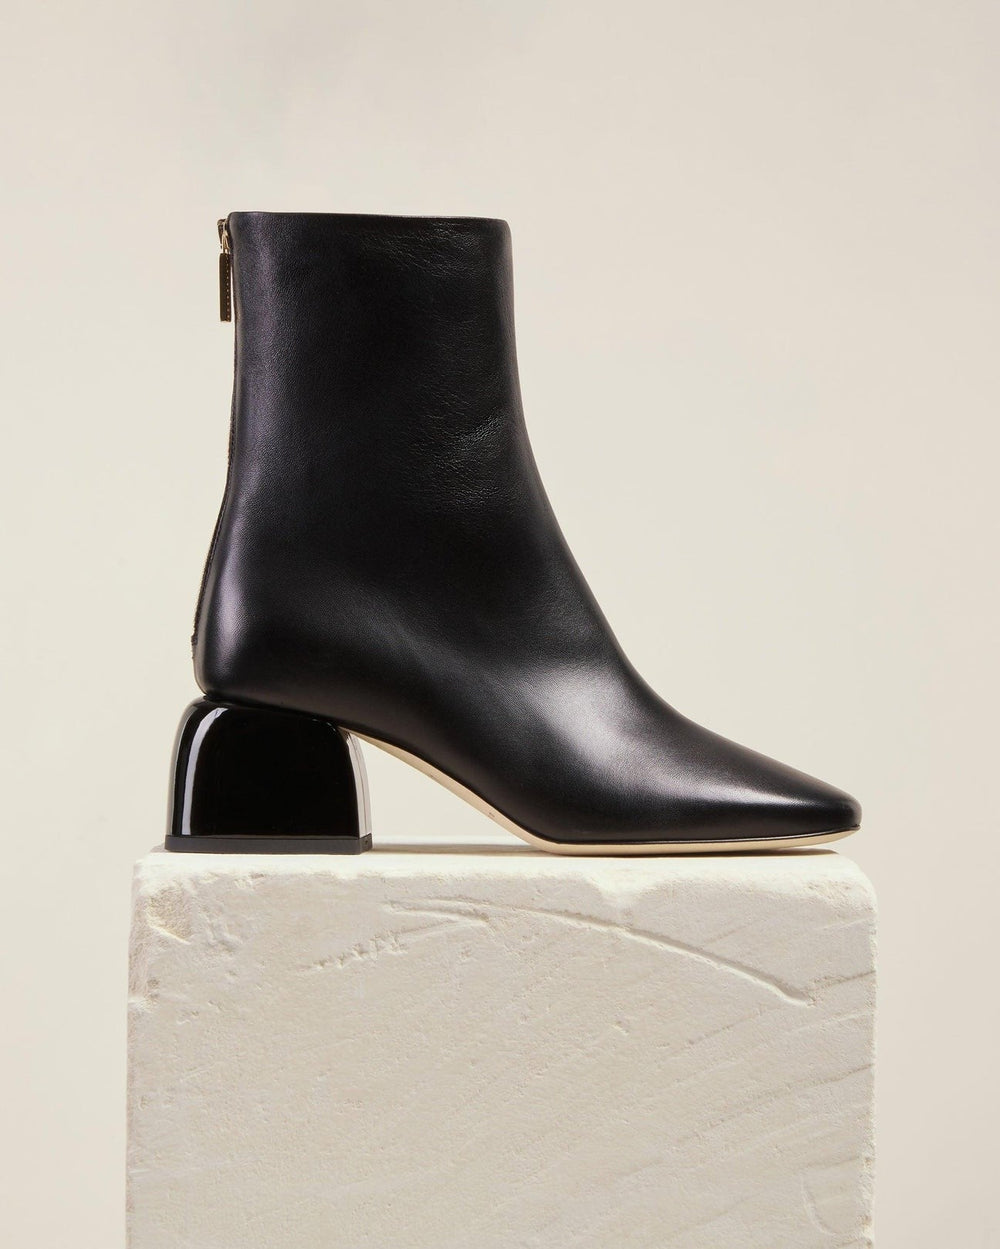 Smooth, sculptural and as soft as butter, our form-fitted ankle boot features a distinctive curved block heel, back zip closure and a unique asymmetric toe shape. Form is soft, supple and designed to an ideal mid-heel height for all day, all year wear.